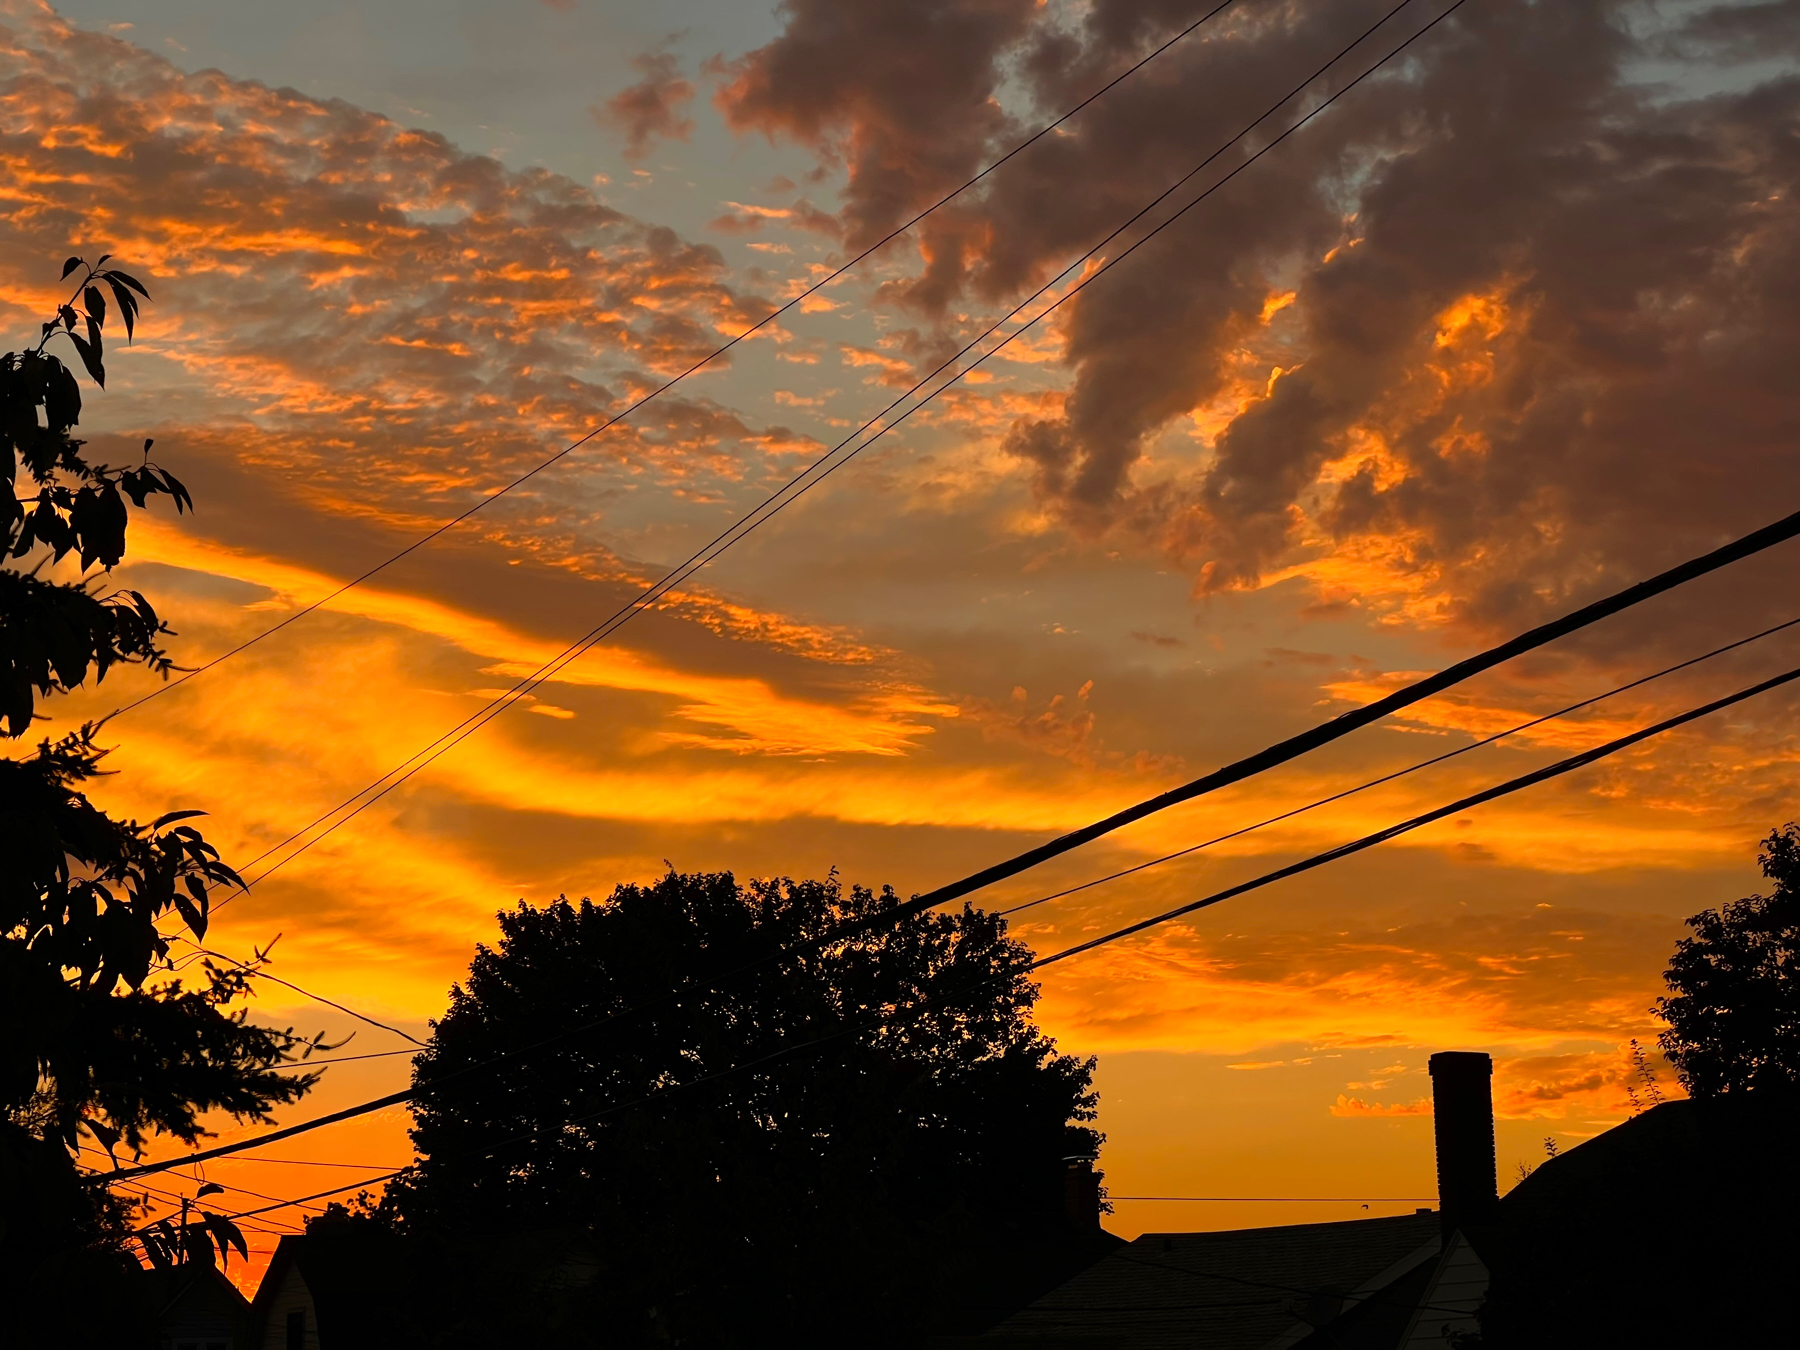 Sunset with patchy clouds and gradients of yellow, orange, gold, blue with silhouetted trees and houses in the lower foreground.